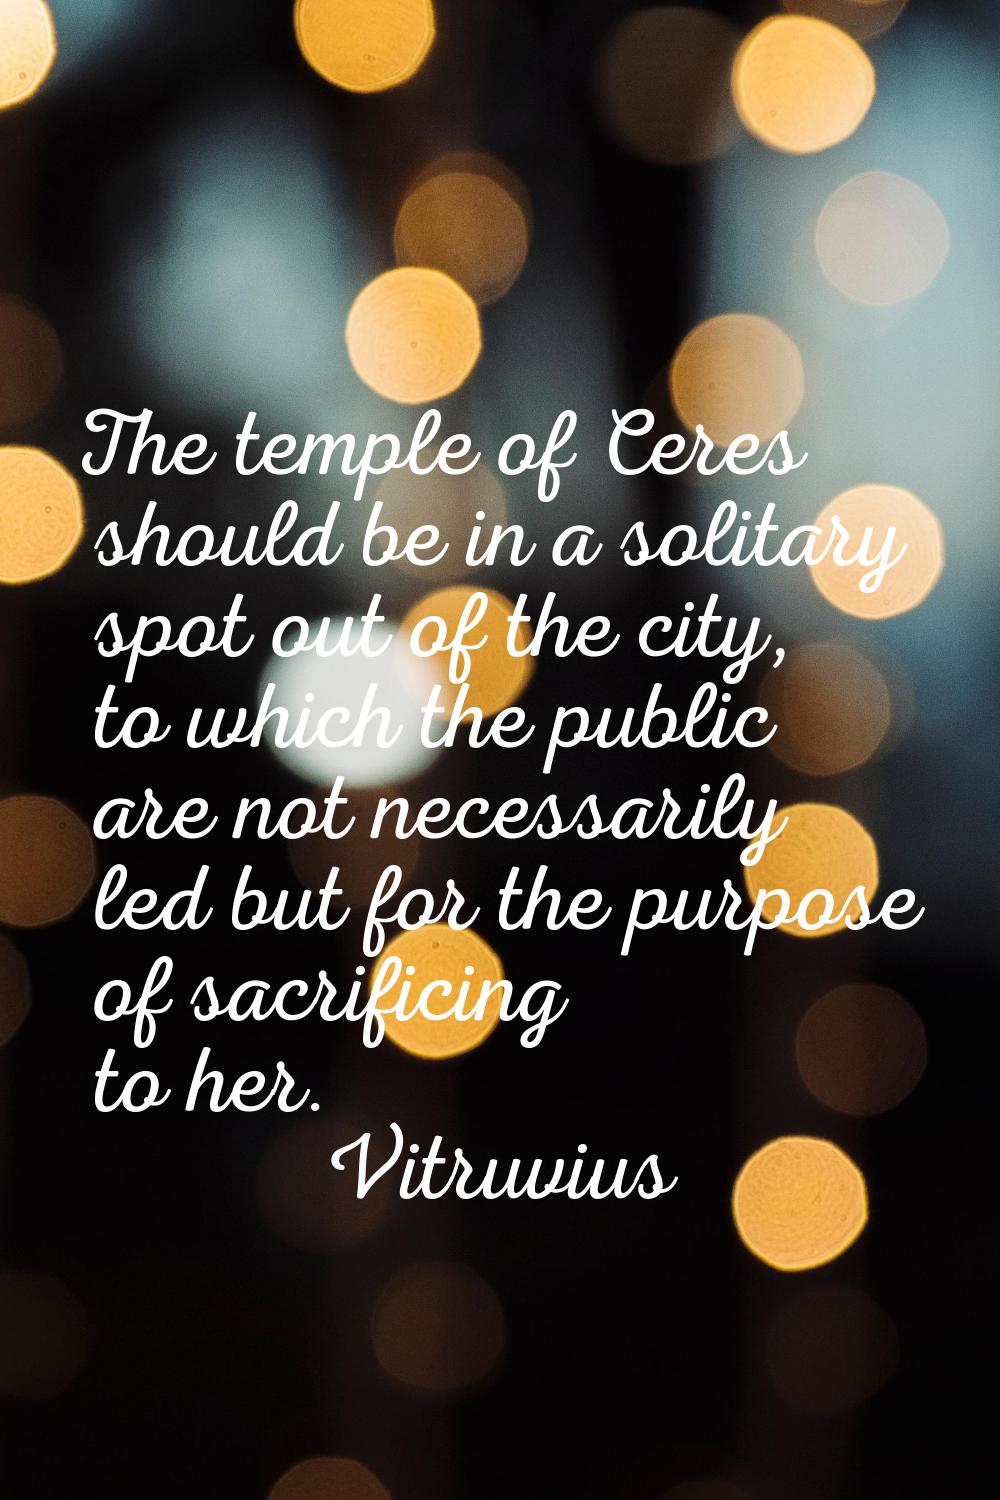 The temple of Ceres should be in a solitary spot out of the city, to which the public are not neces